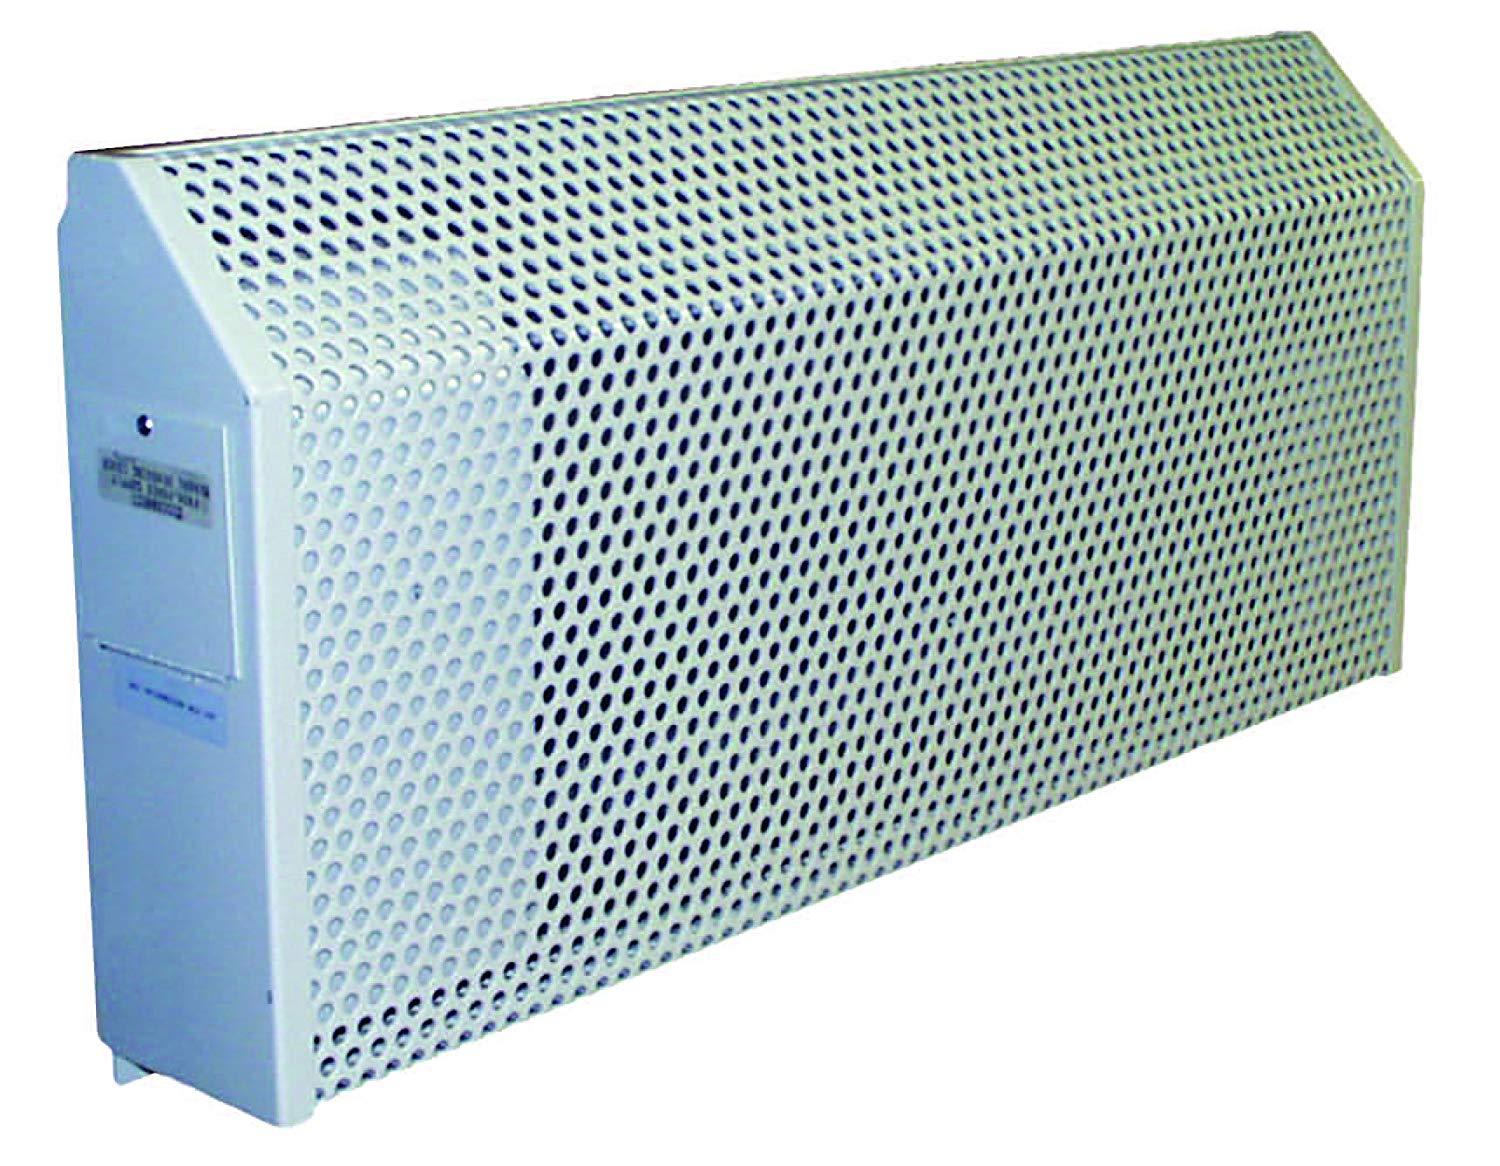 TPI 500W 240V Institutional Wall Convector - H8801050